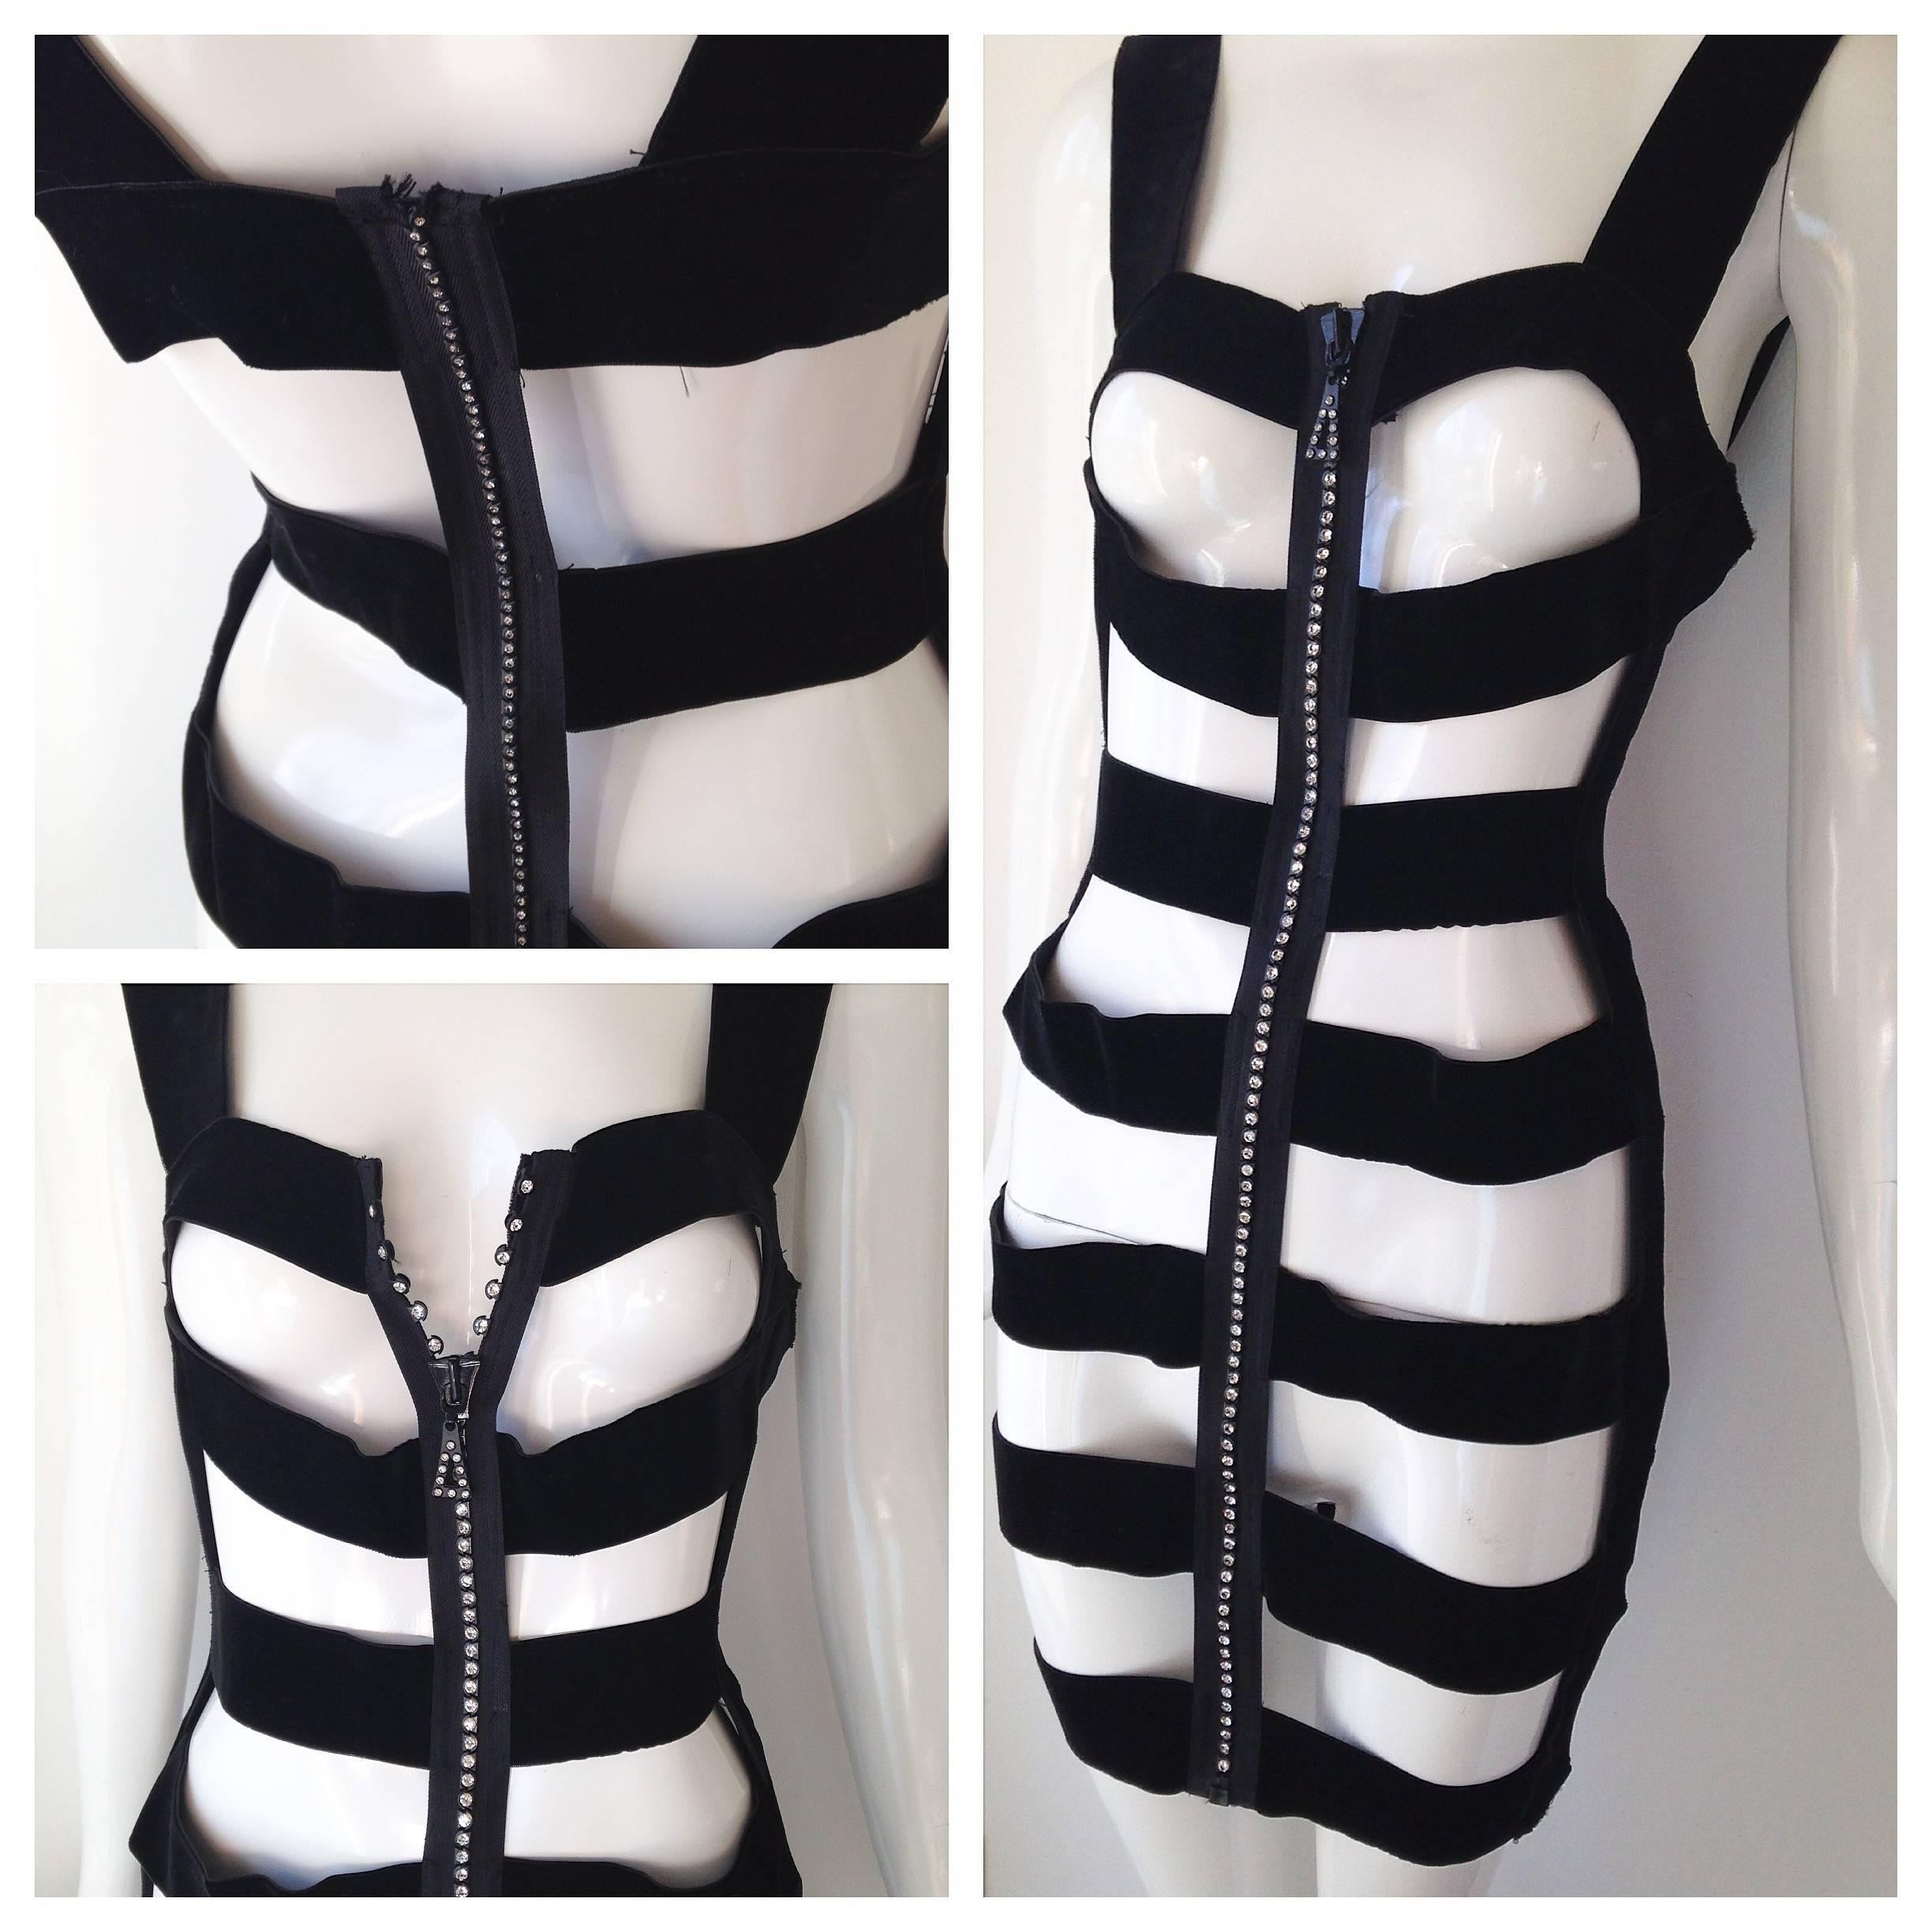 Jean Paul Gaultier style vintage late 80s, 90s body con zipper band dress. (I did speak with someone who had this Gaultier but it has no tag) This piece was purchased at a museum deacquisition and collector's auction. This zipper dress is hand made